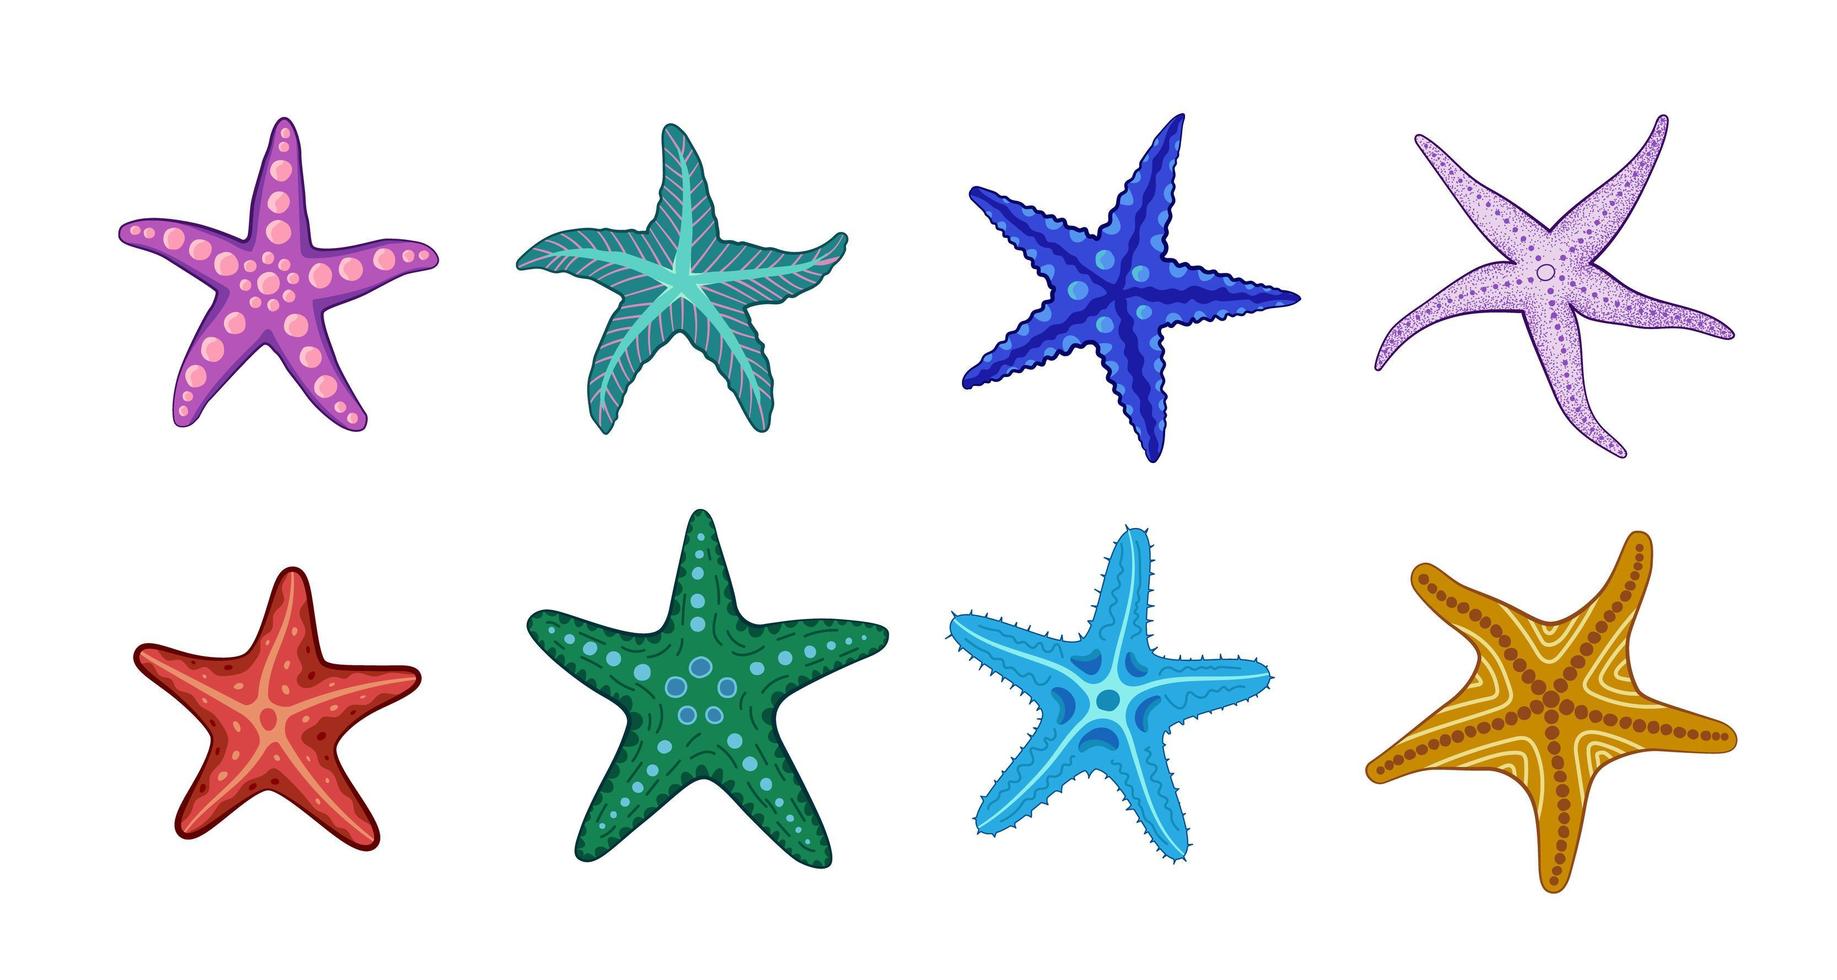 Starfish in different style and colors. Colorful and cute. vector